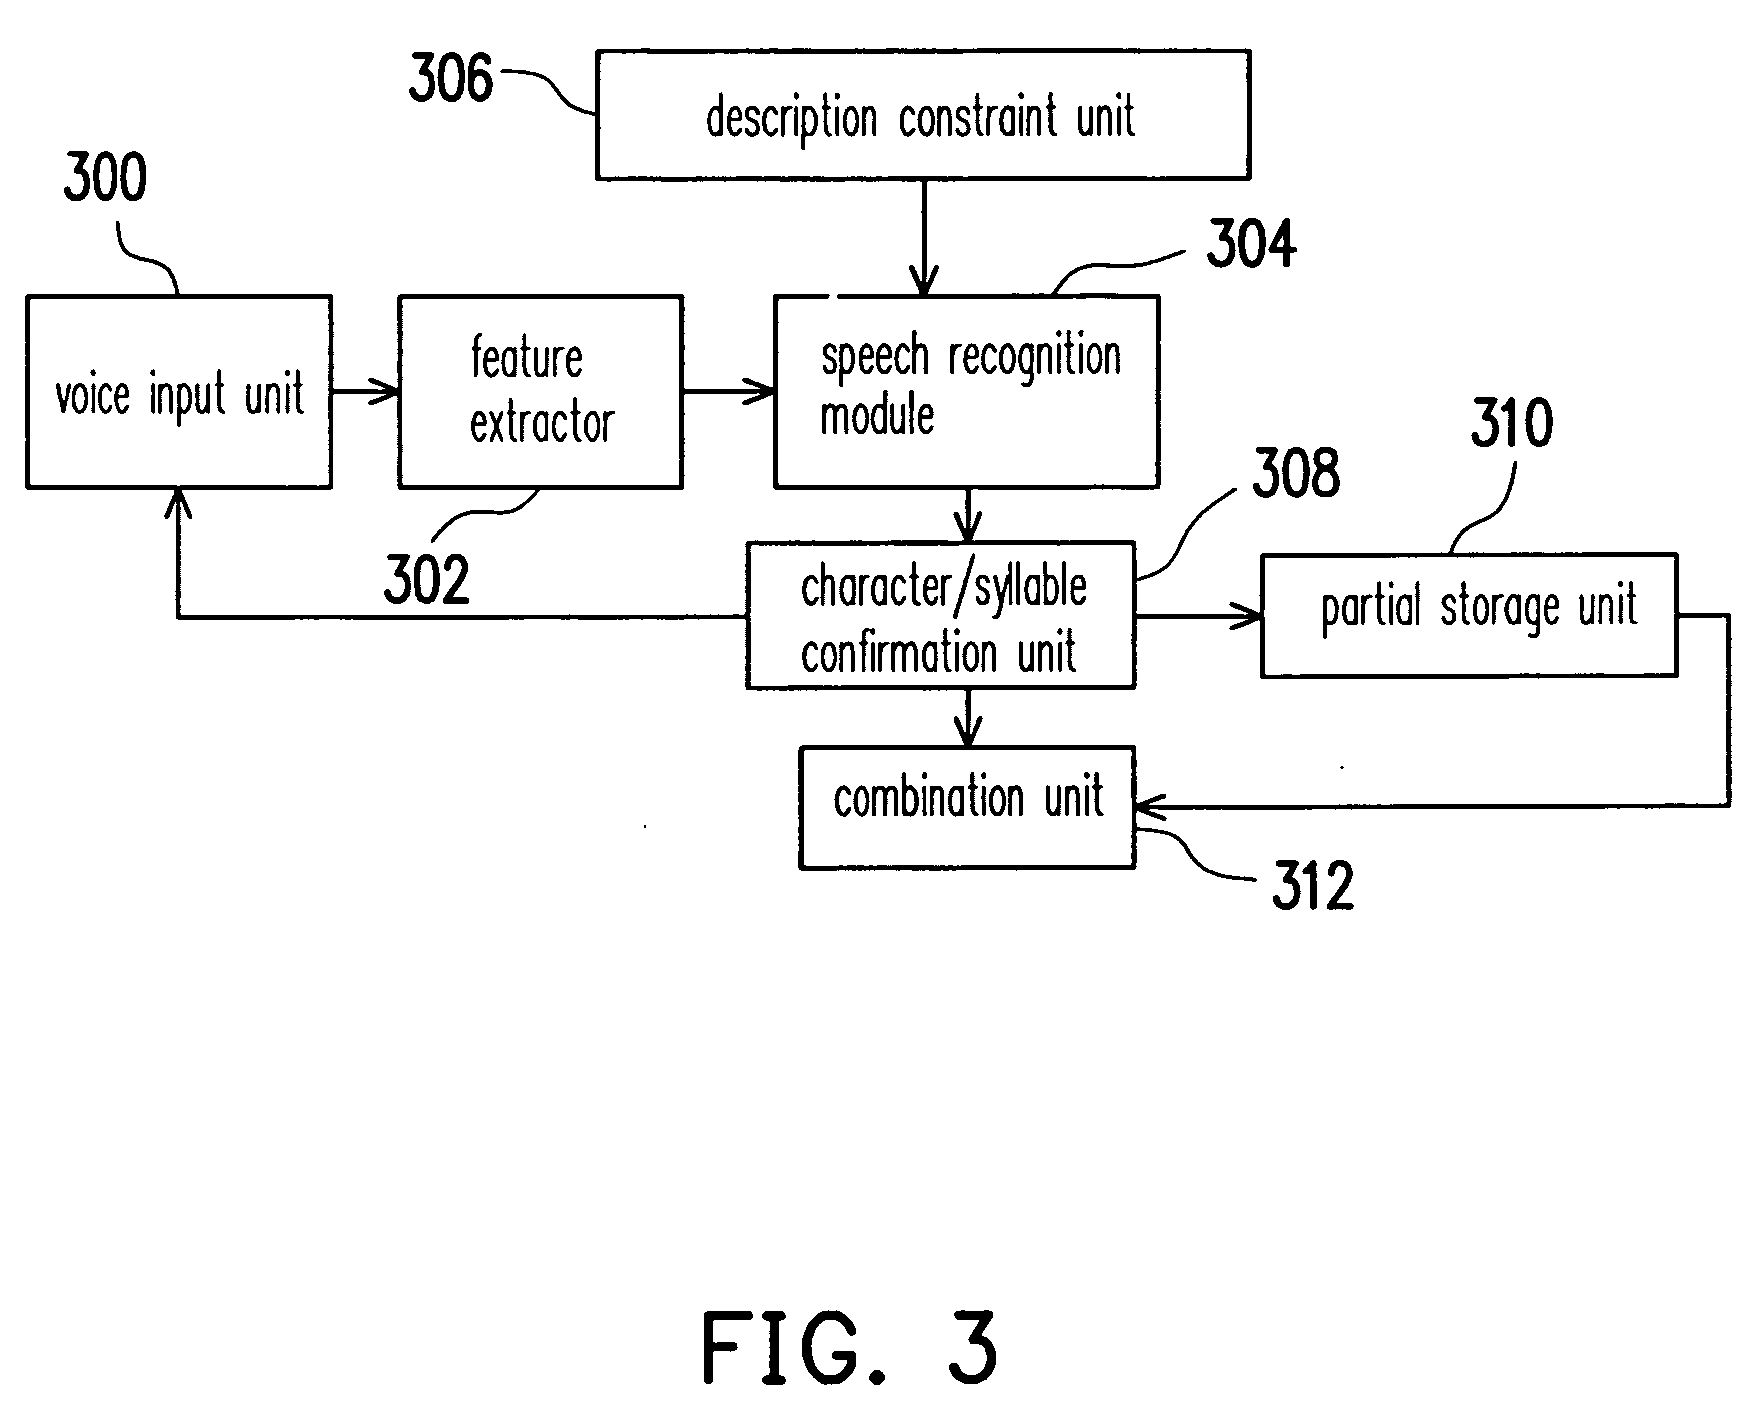 Method and apparatus for constructing new chinese words by voice input